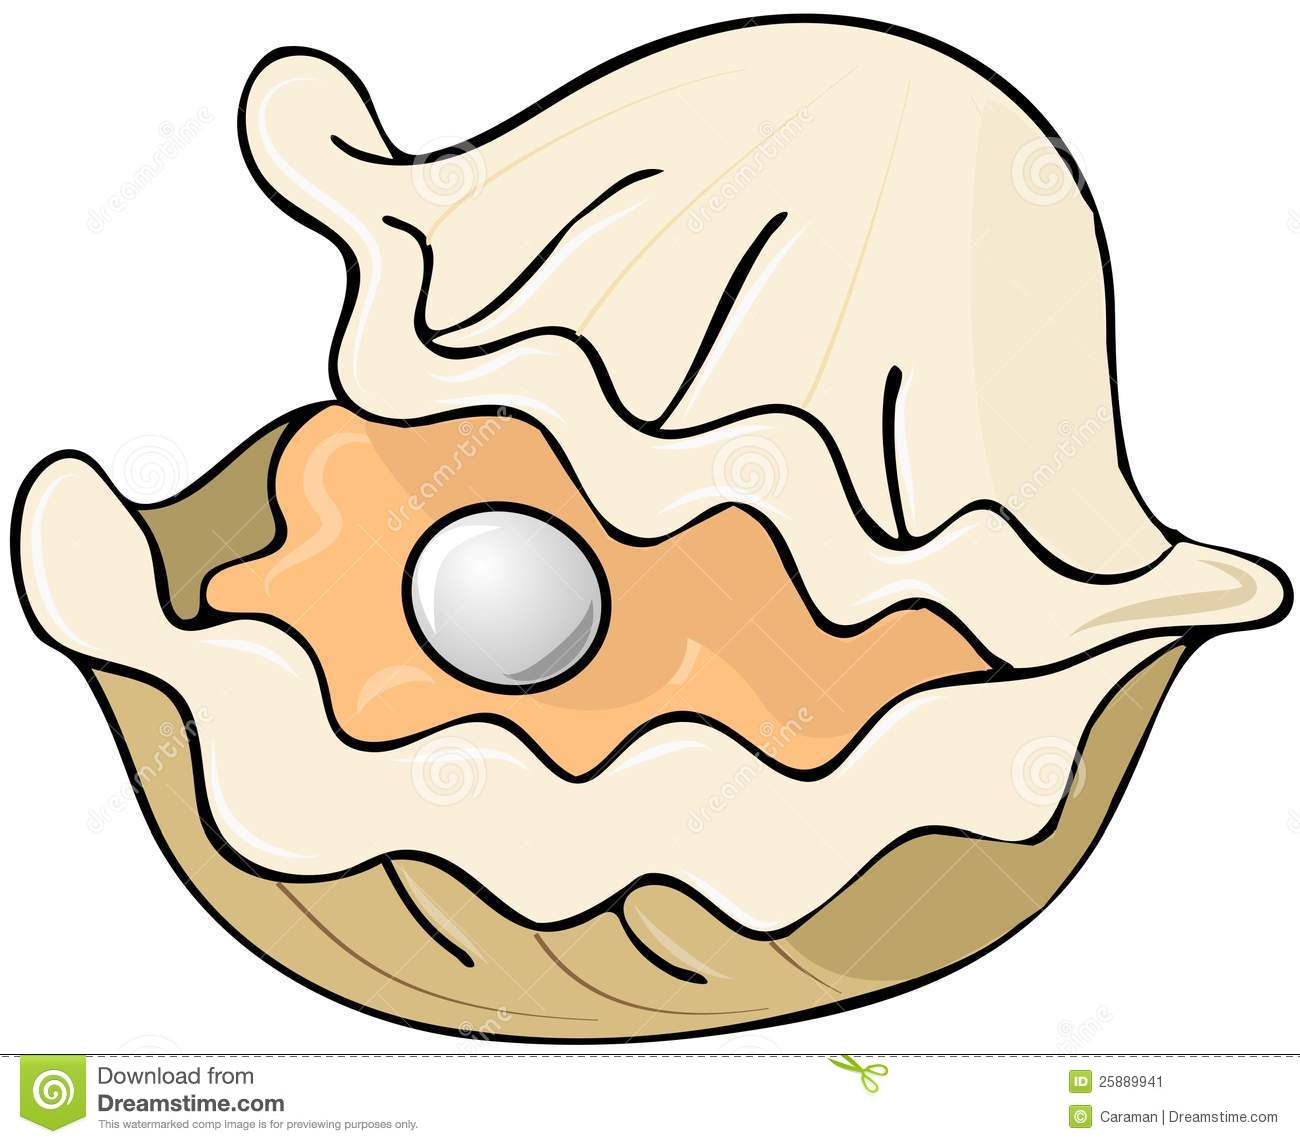 This Illustration Depicts A Cartoon Oyster Half Opened To Reveal A